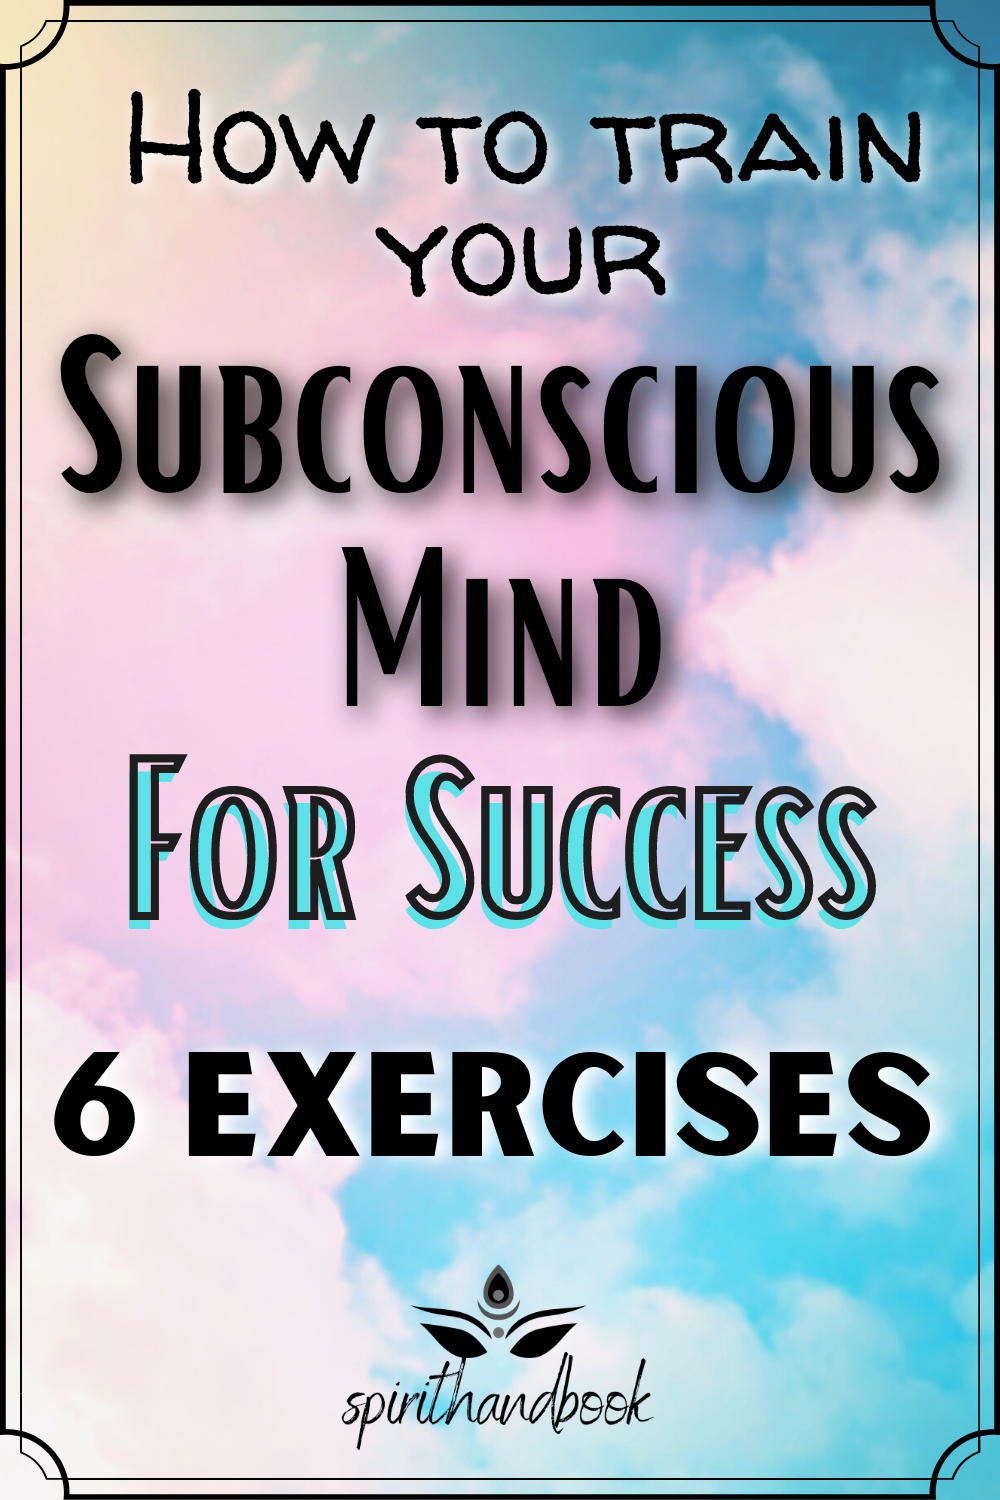 How To Train Your Subconscious Mind For SUCCESS: 6 Exercises